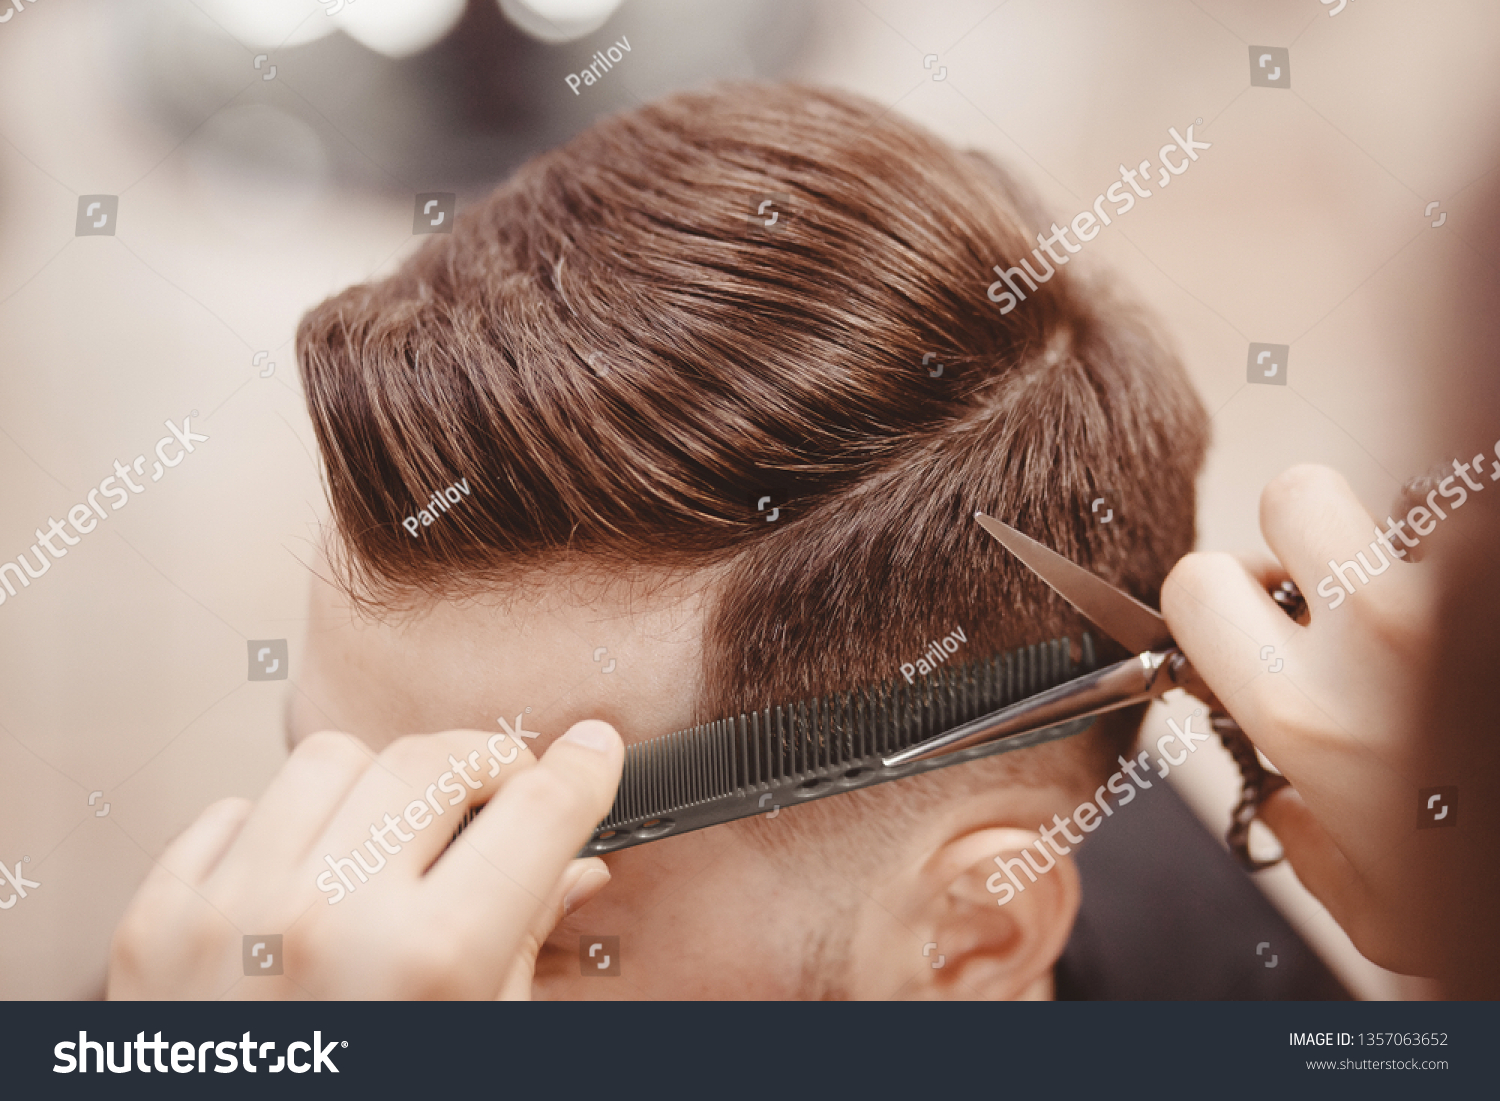 Close-up, master hairdresser does hairstyle with scissors comb. Concept Barbershop. #1357063652